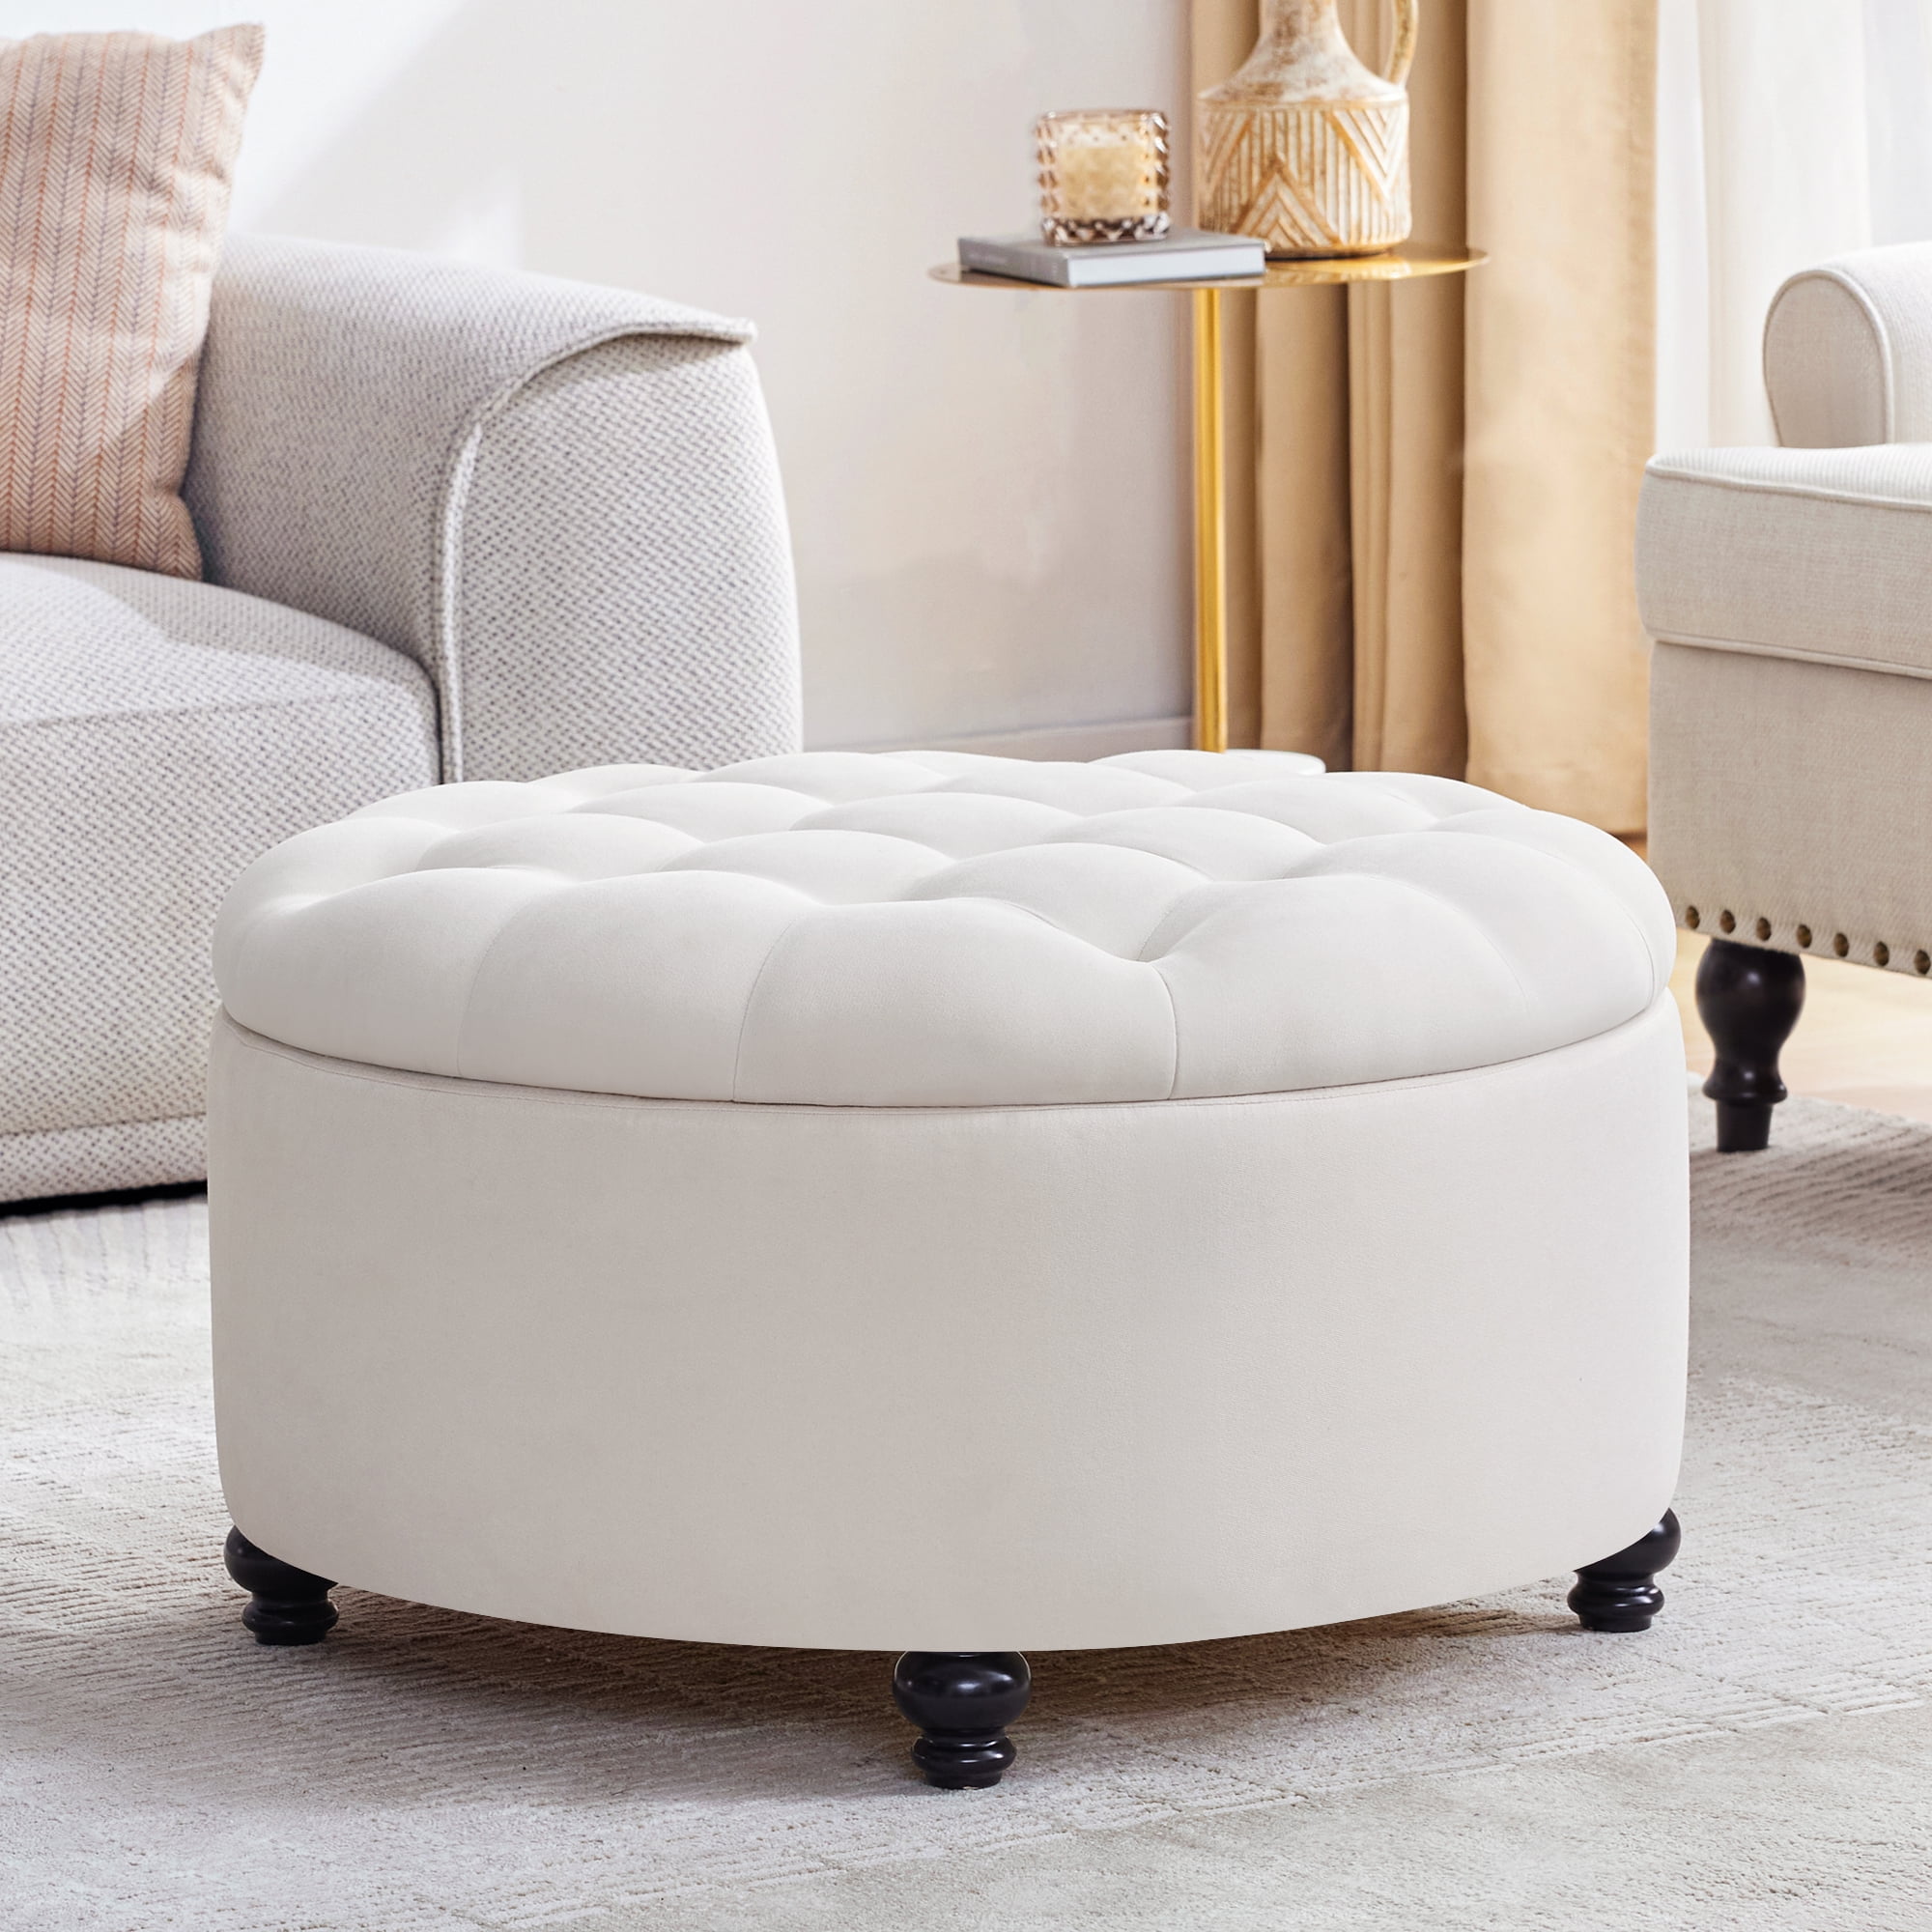 HUIMO 30-Inch Round Storage Ottoman, Upholstered Button Tufted Ottoman ...